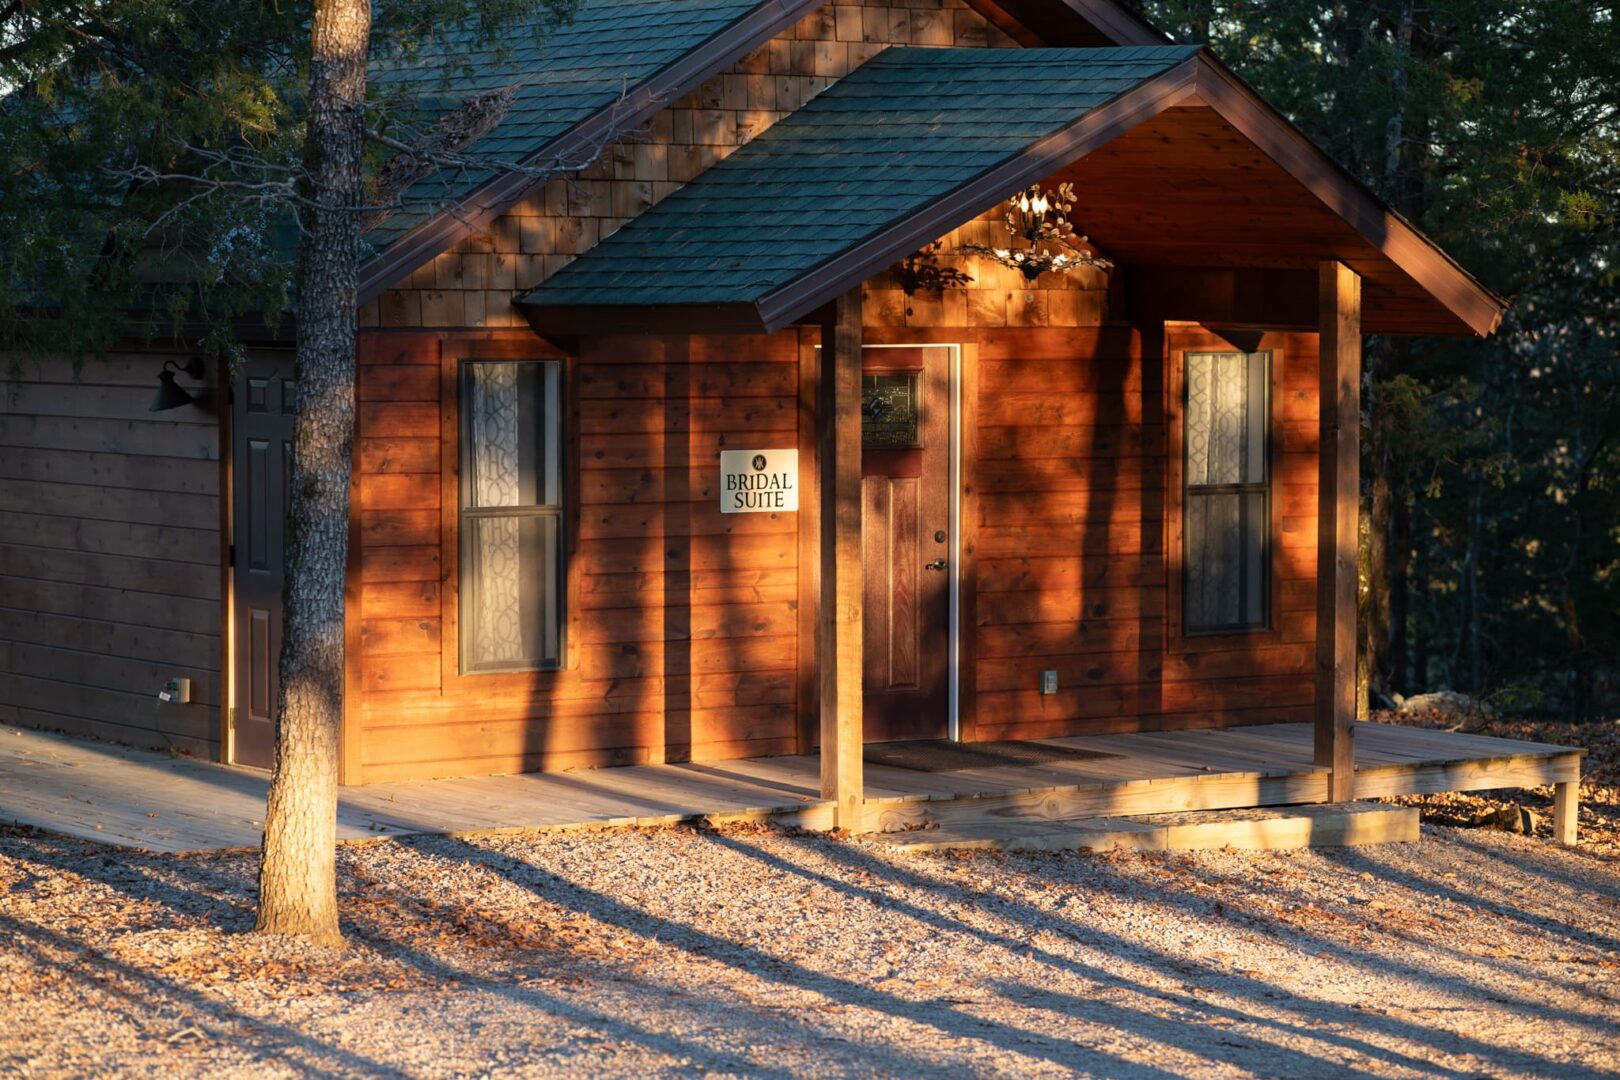 A cabin with a porch and trees in the background.